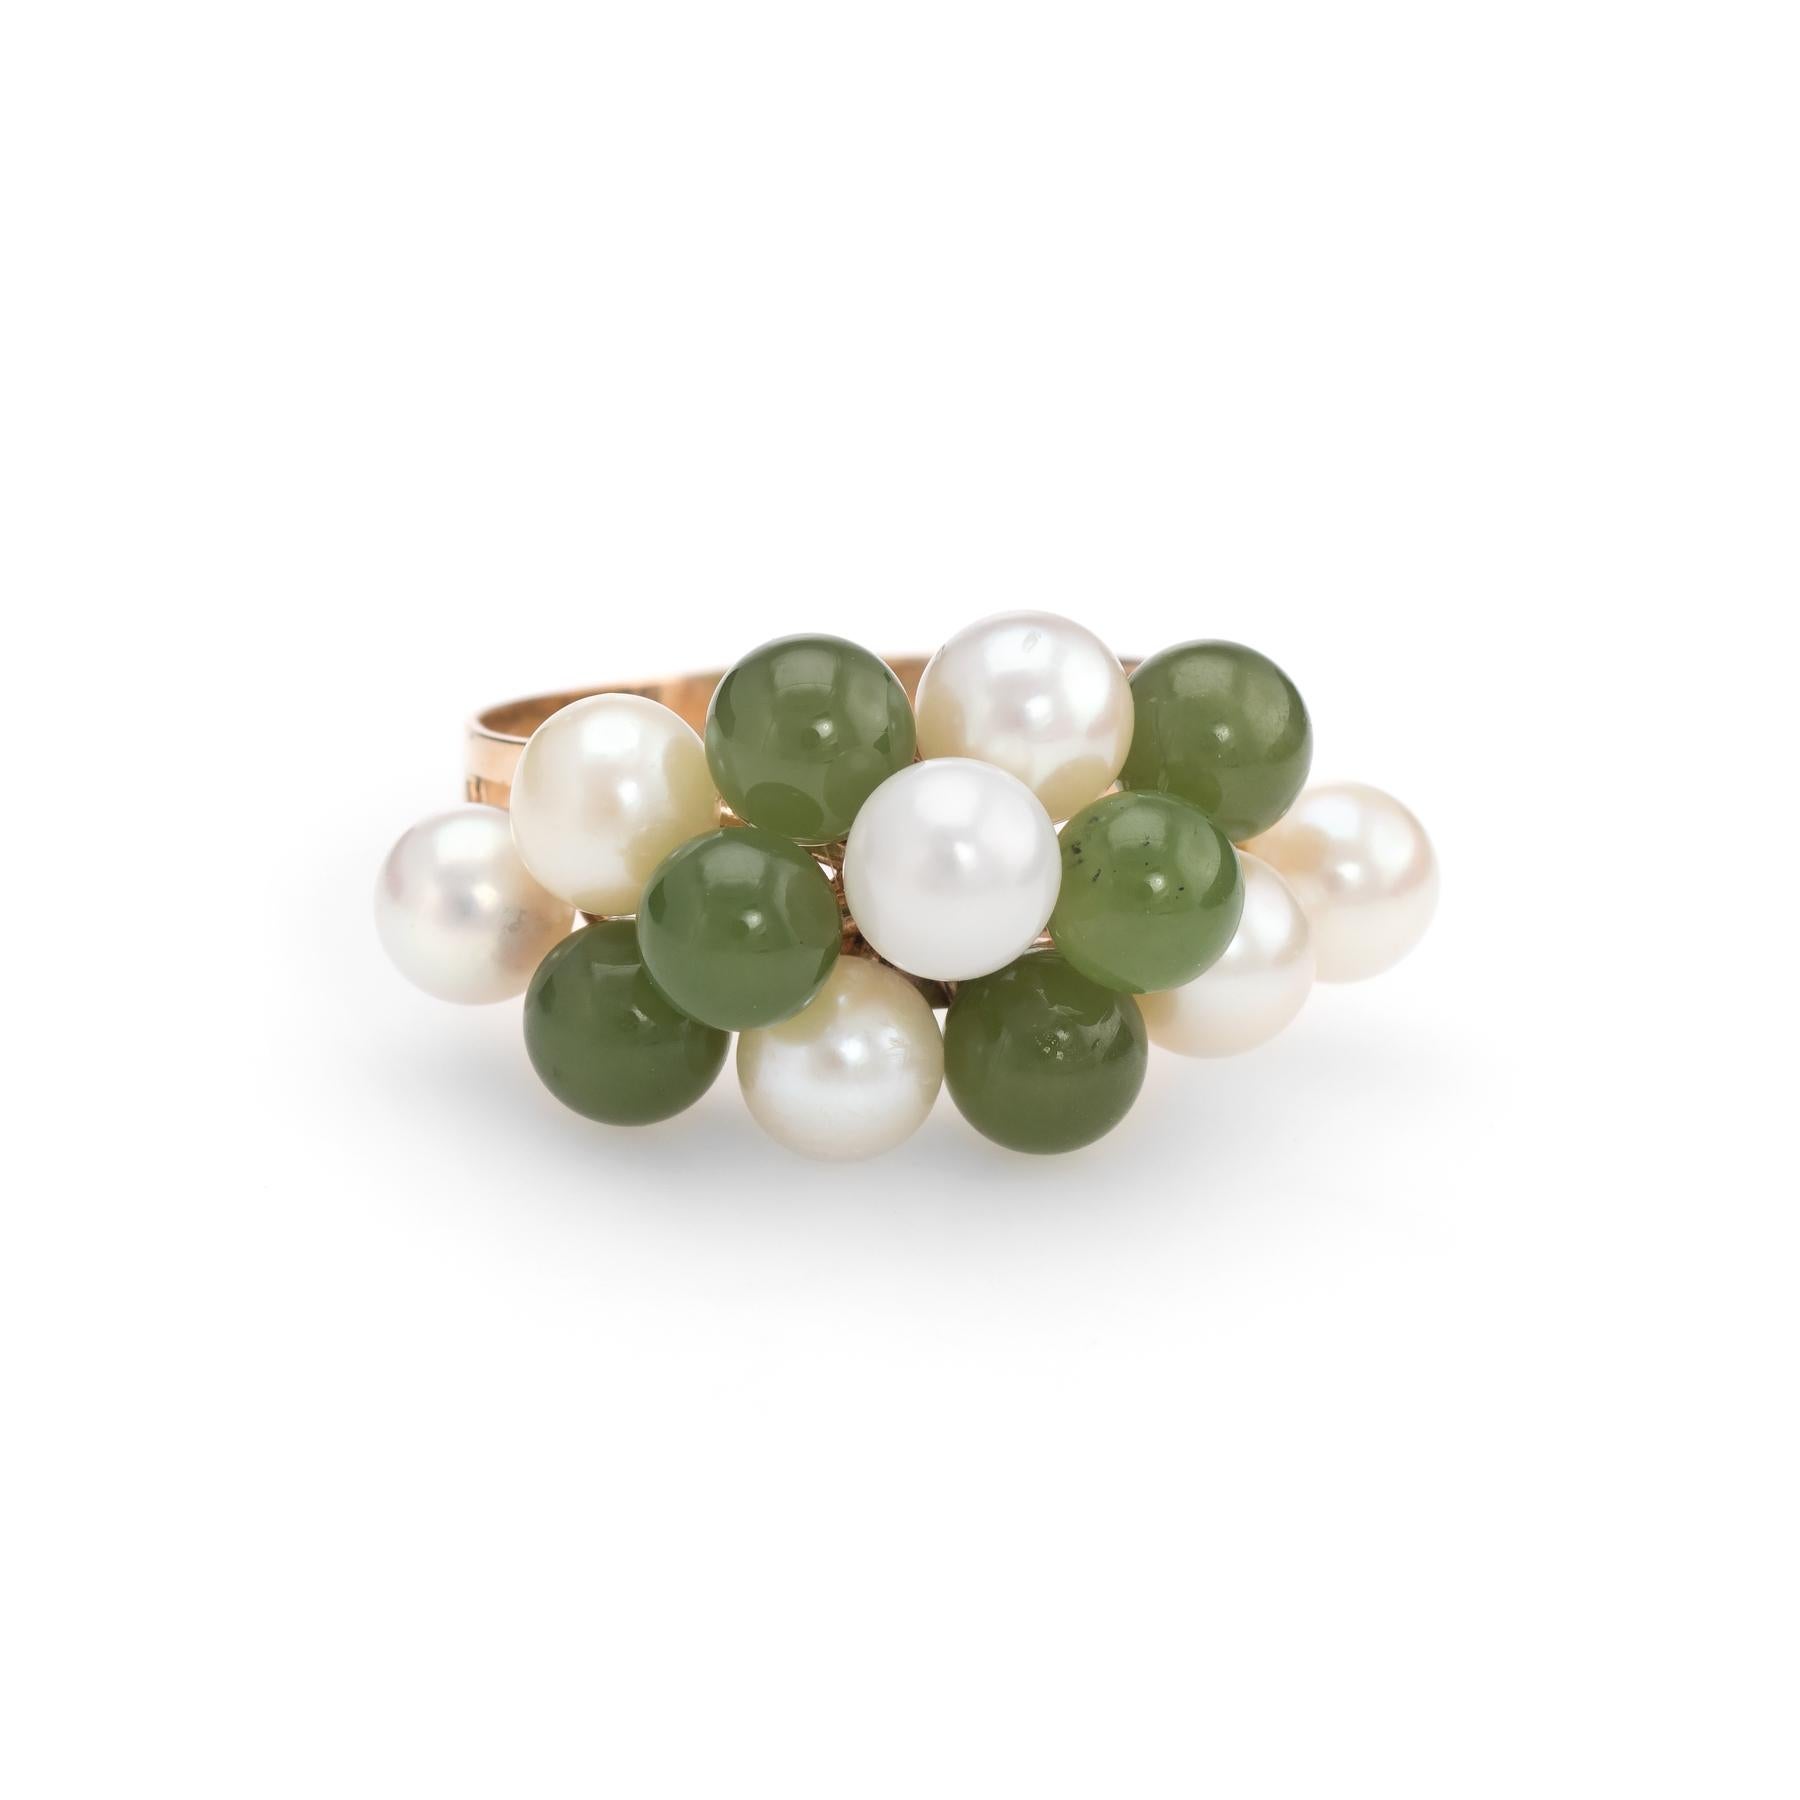 Elegant vintage ring (circa 1950s to 1960s), crafted in 14 karat yellow gold. 

7 cultured pearls range in size from 4mm to 5mm. The 6 pieces of jade (nephrite) measure 4.5mm each. The pearls & jade are in excellent condition and free of cracks or